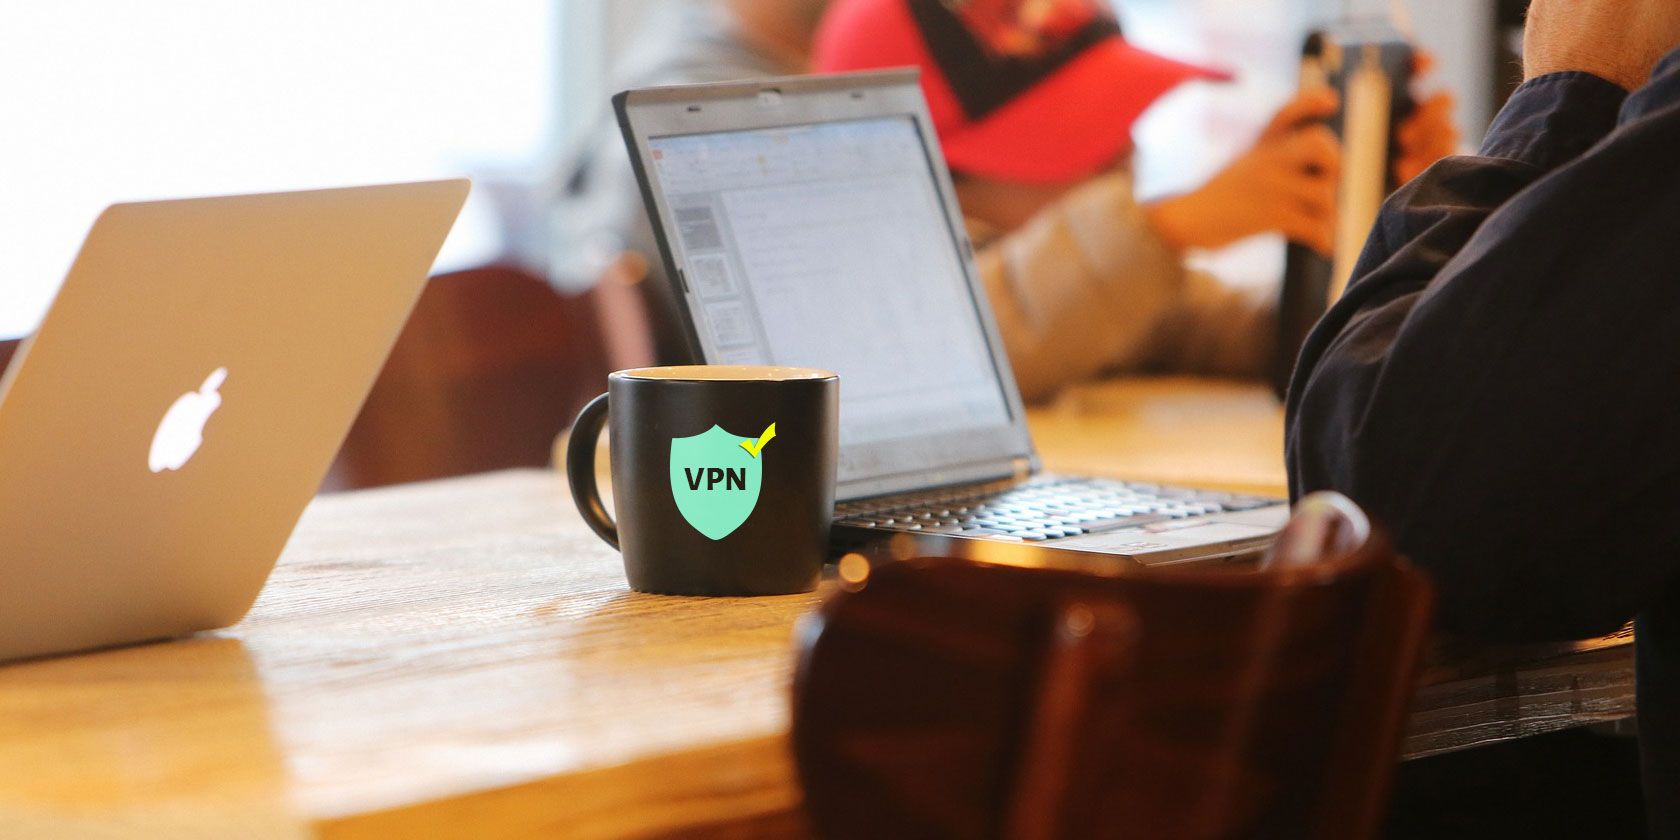 5 Reasons Why Home and Remote Workers Should Use a VPN